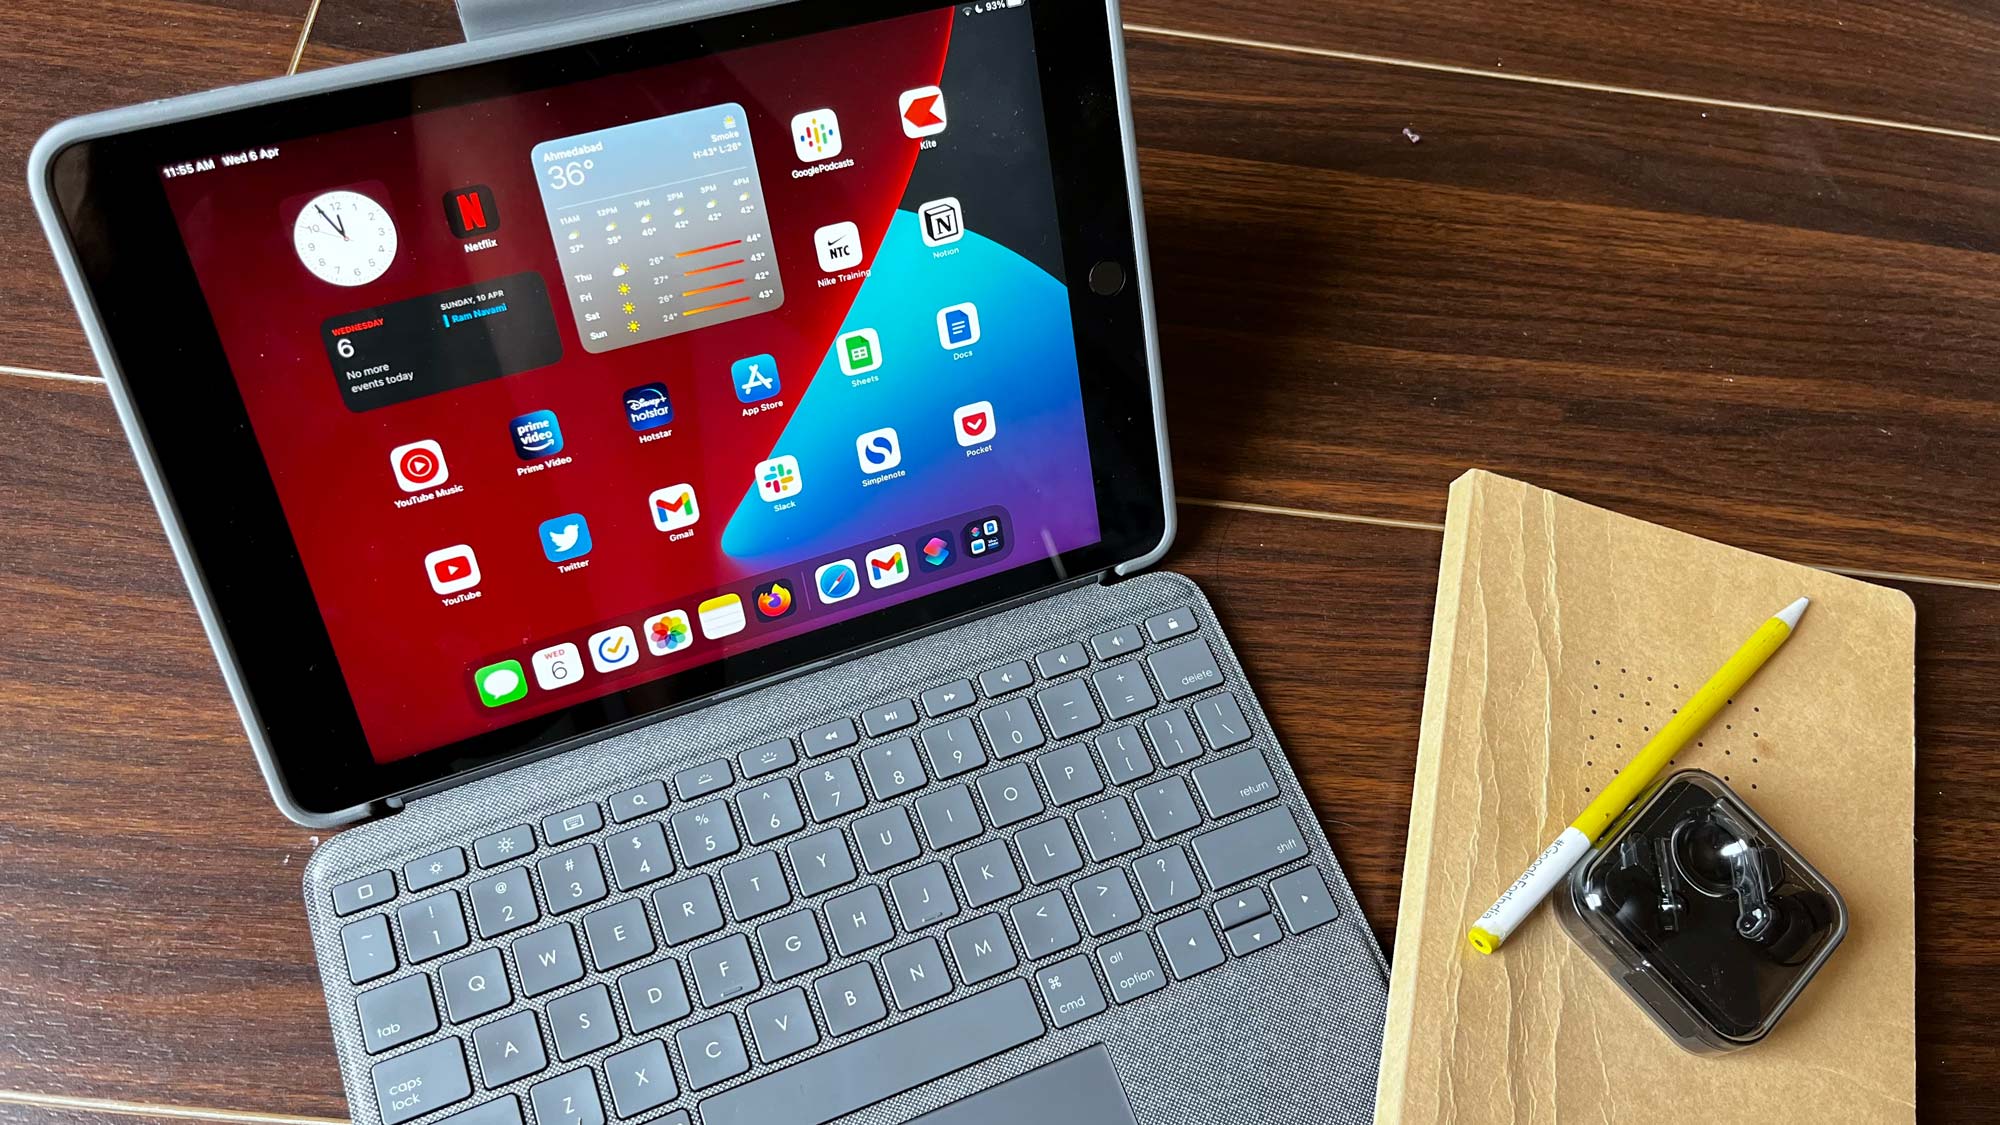 iPad vs. Chromebook: Which is better for work?